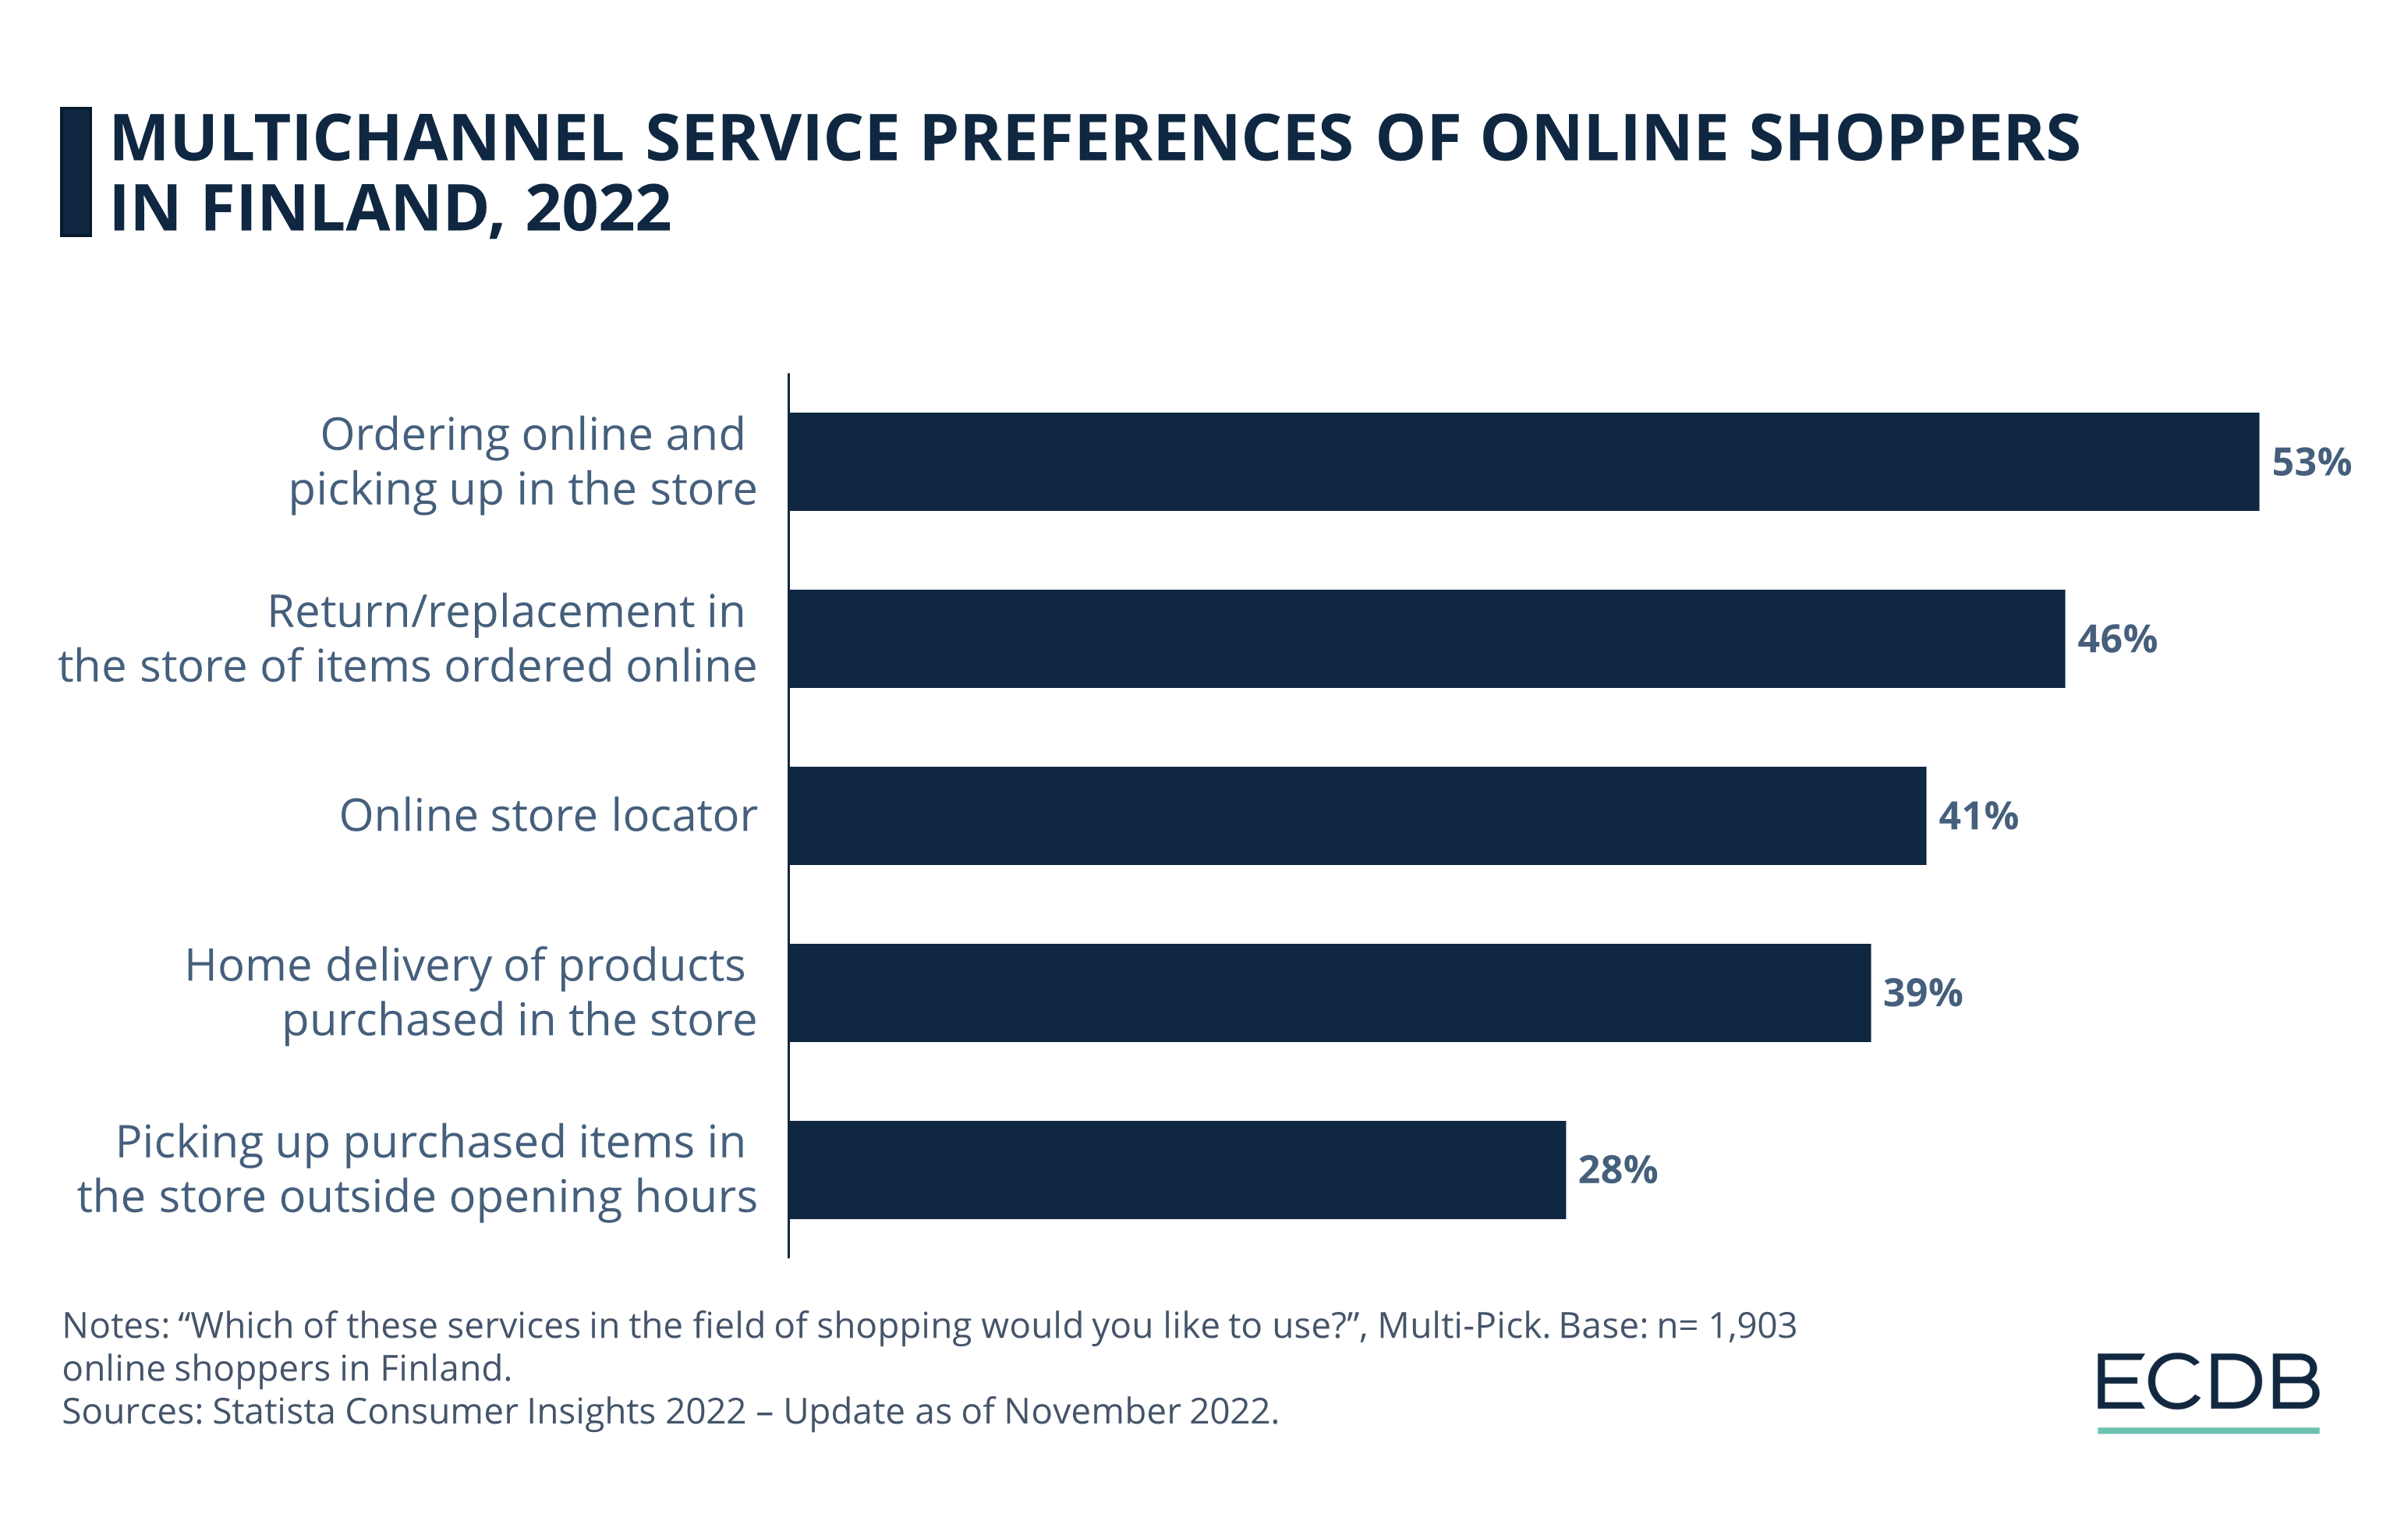 Multichannel Service Preferences of Online Shoppers in Finland, 2022